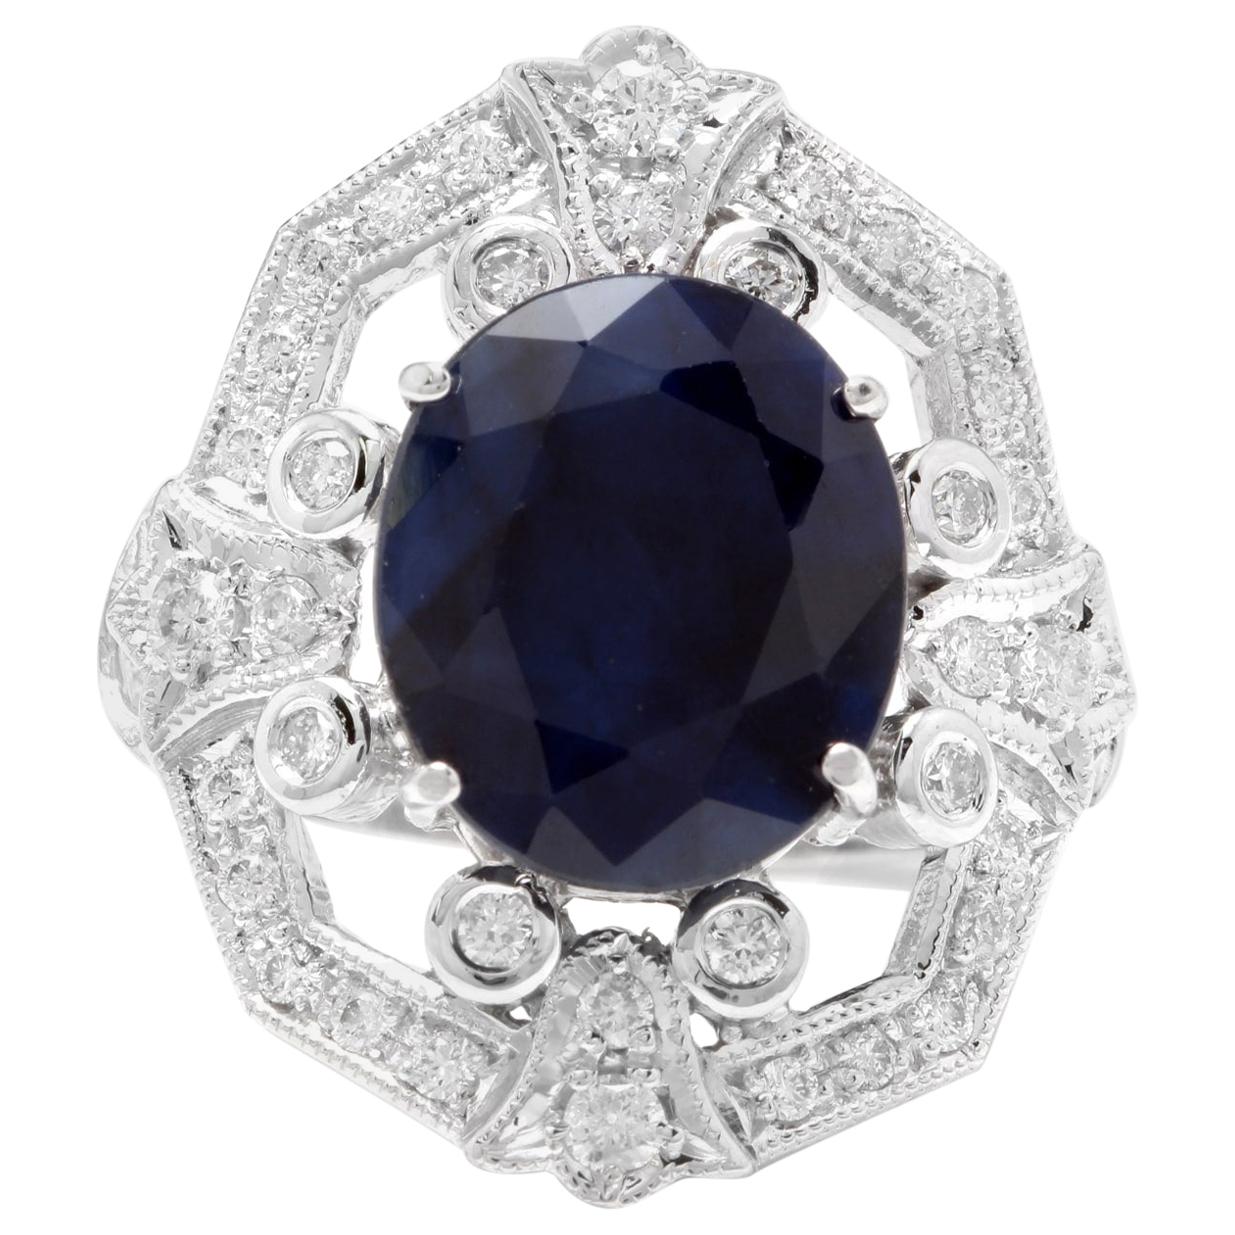 9.70 Carat Exquisite Natural Blue Sapphire and Diamond 14 Karat Solid White Gold